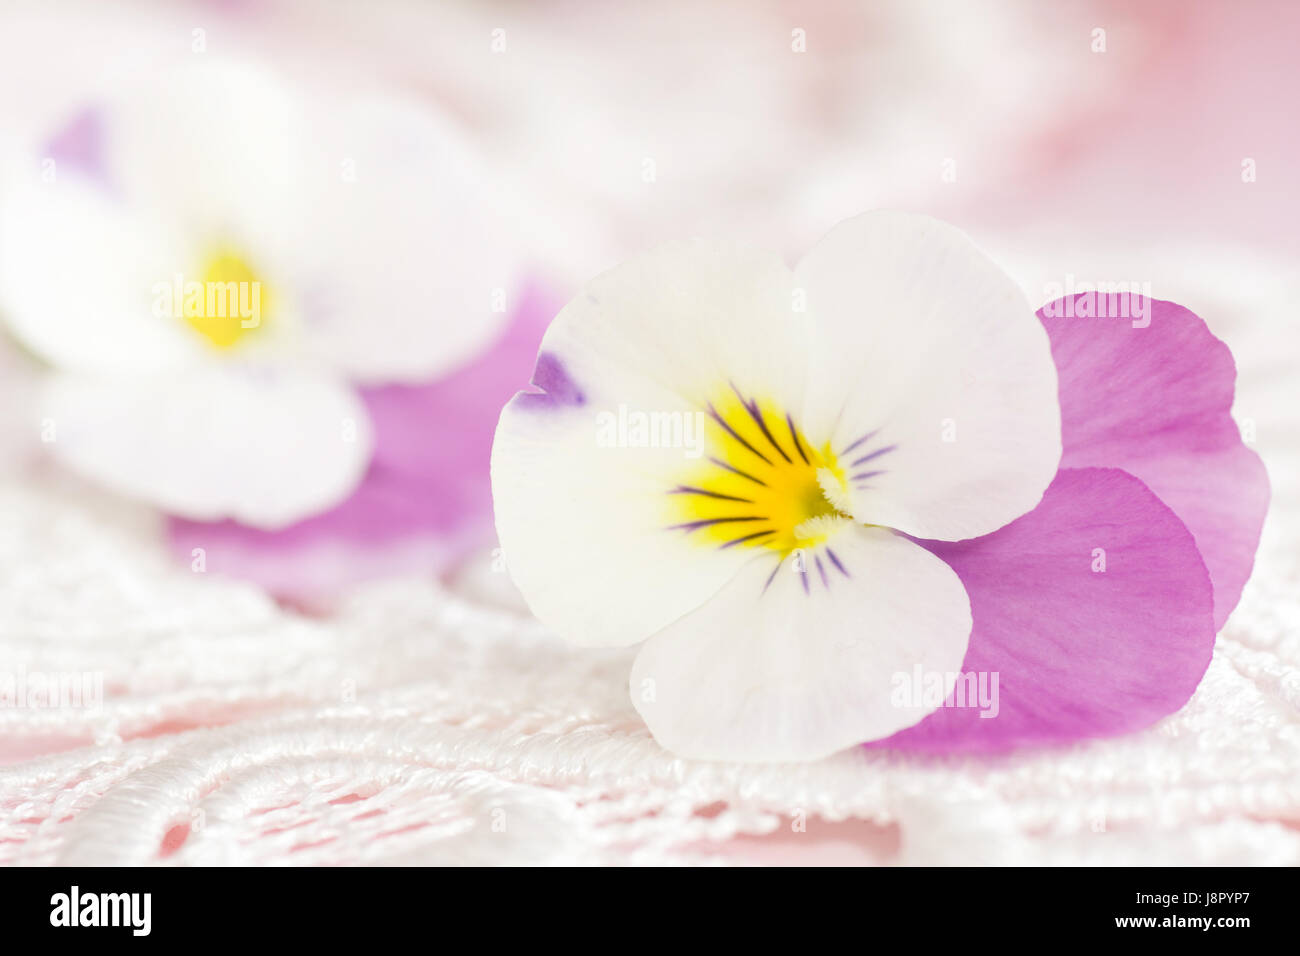 flower, plant, flowers, botany, basket, spring, homeopathy, naturopathy, pansy, Stock Photo